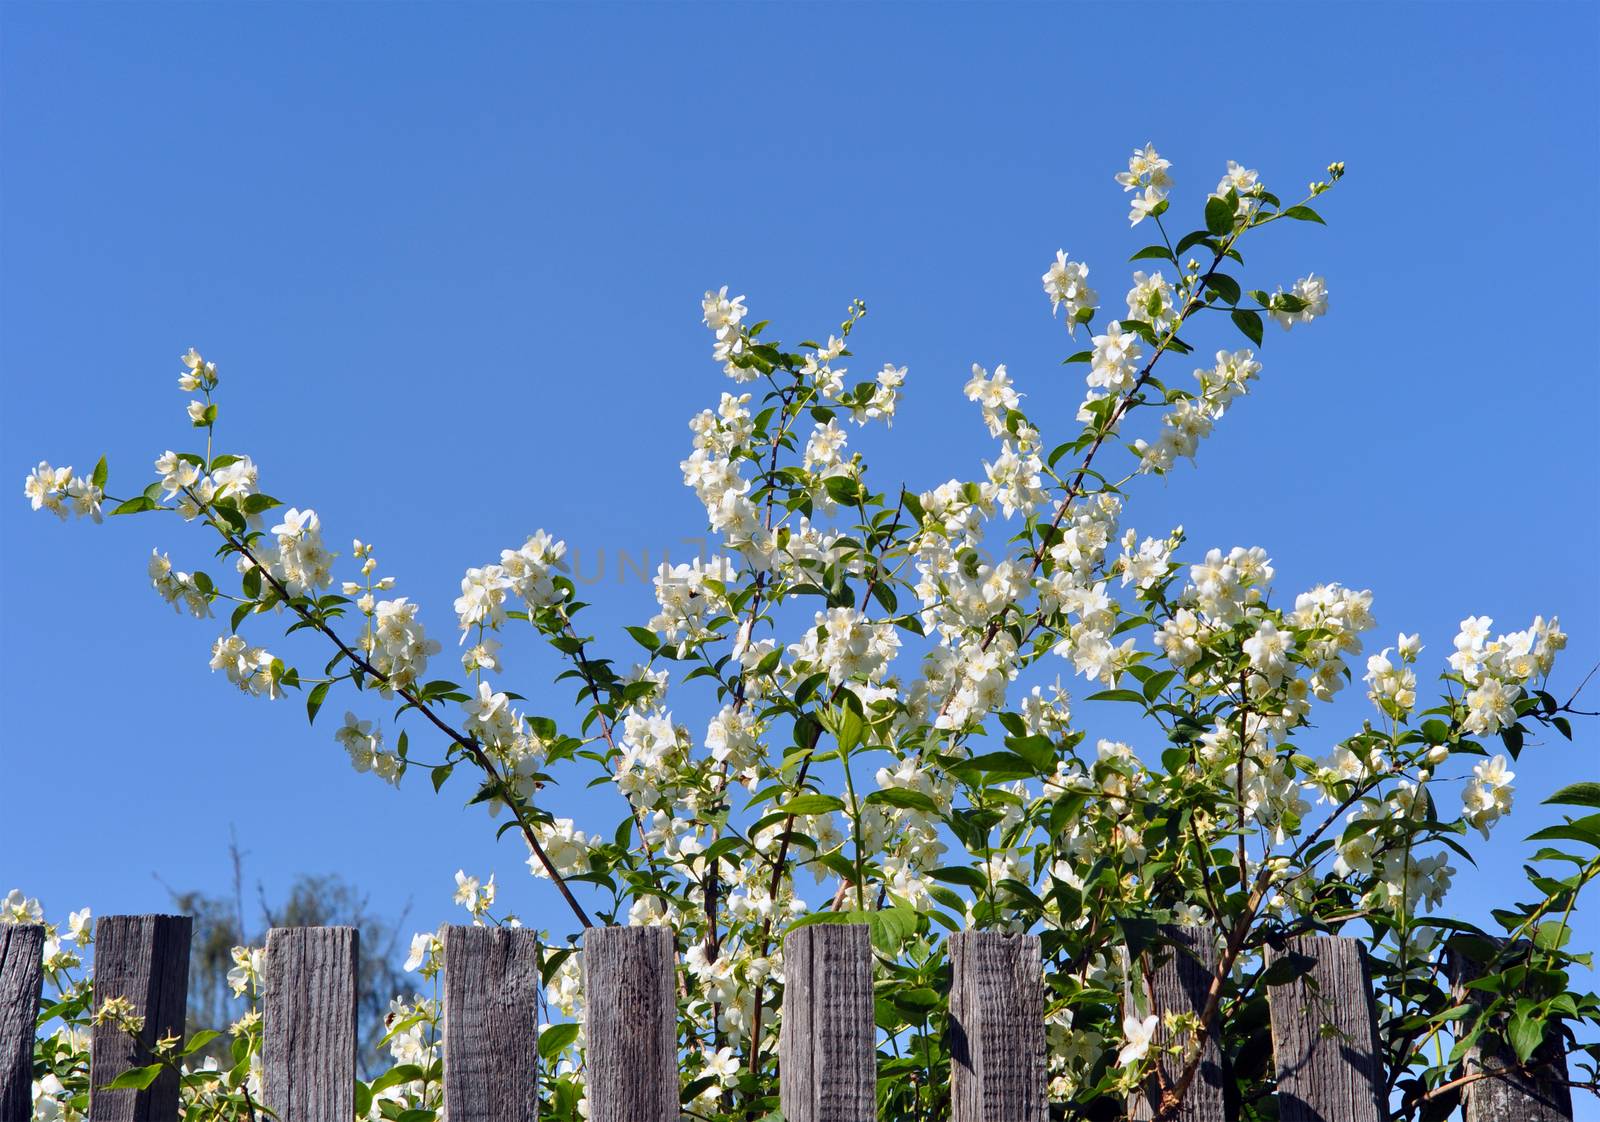 Blossoming apple and fence by alexcoolok